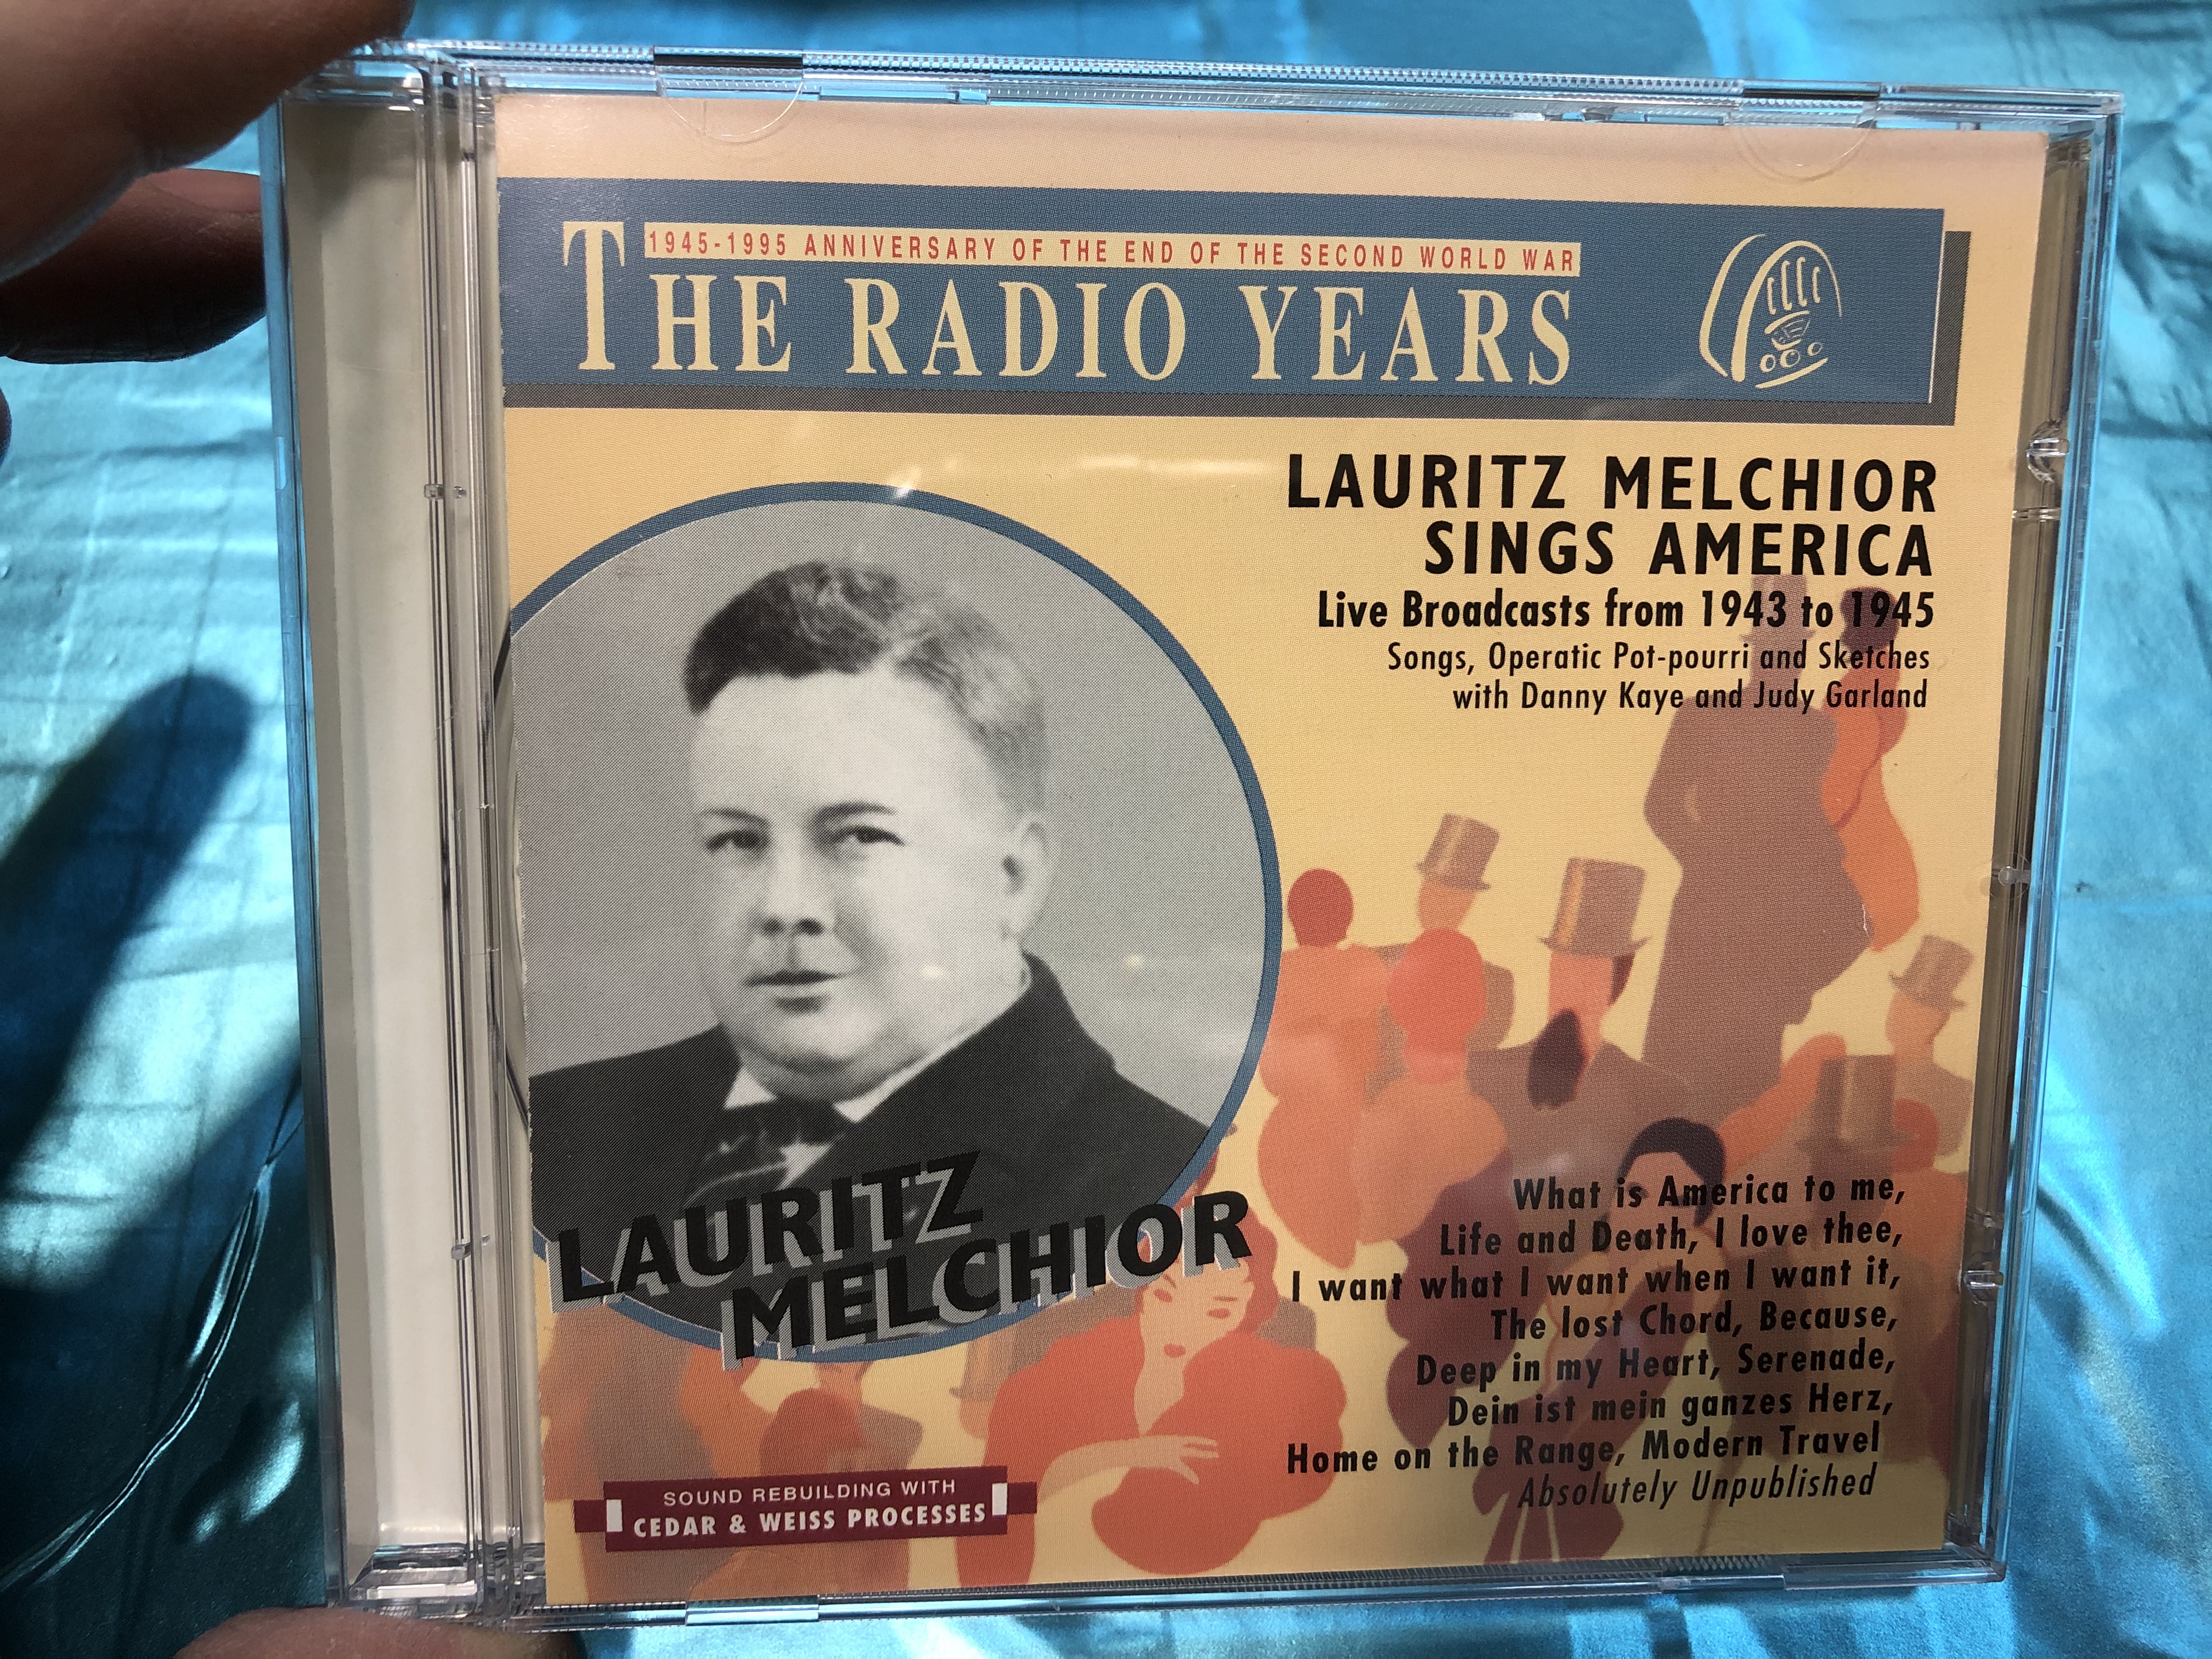 the-radio-years-1945-1995-anniversary-of-the-end-of-the-second-world-war-lauritz-melchior-sings-america-live-broadcasts-from-1943-to-1945-the-radio-years-audio-cd-1995-mono-ry-4-1-.jpg